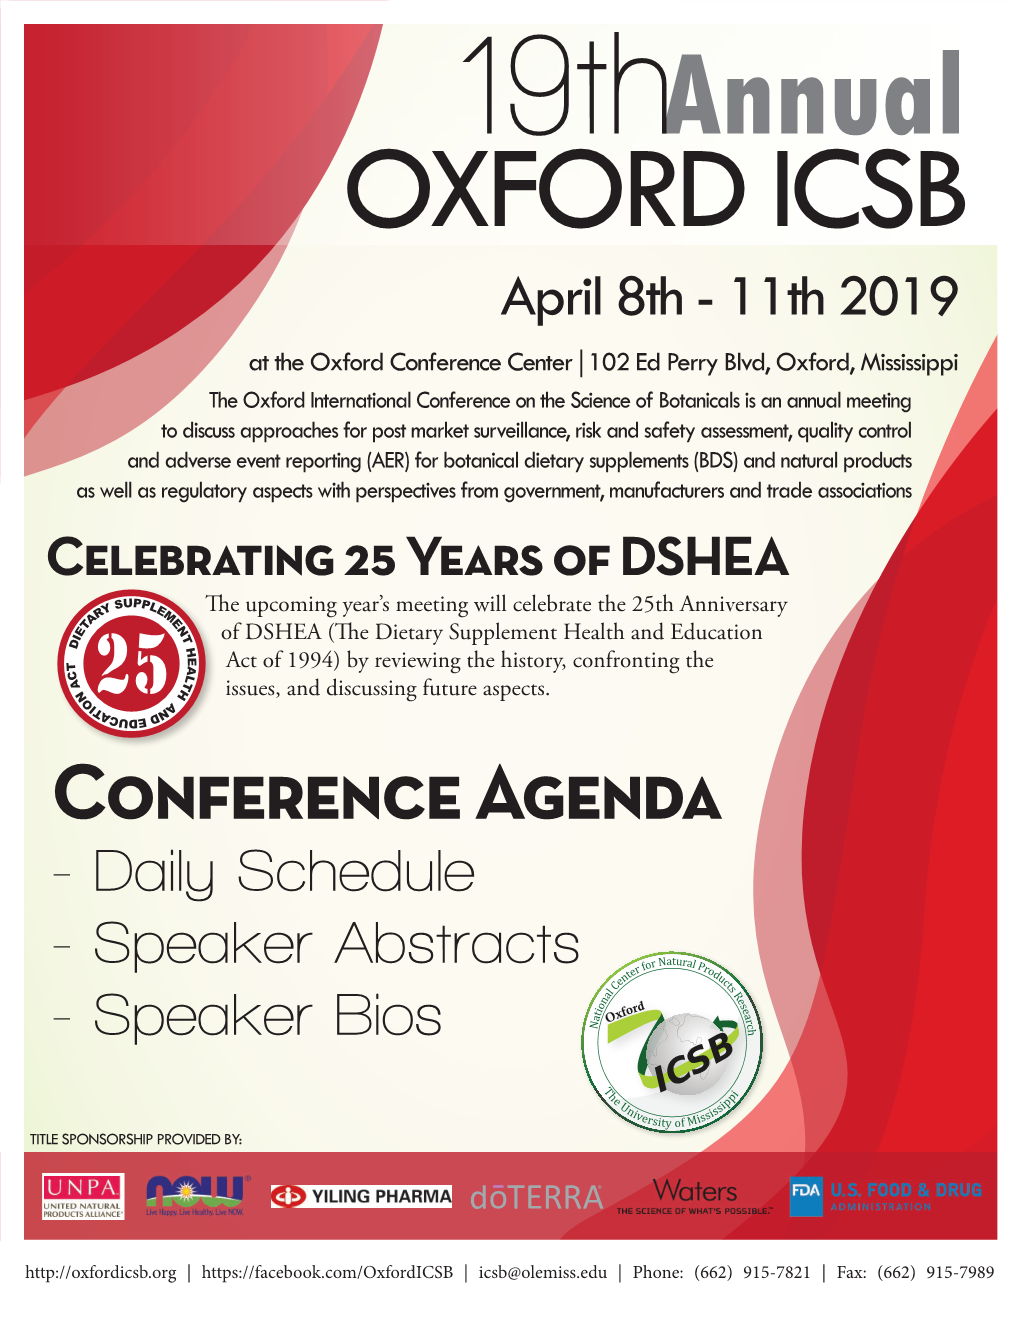 Conference Agenda - Daily Schedule - Speaker Abstracts - Speaker Bios